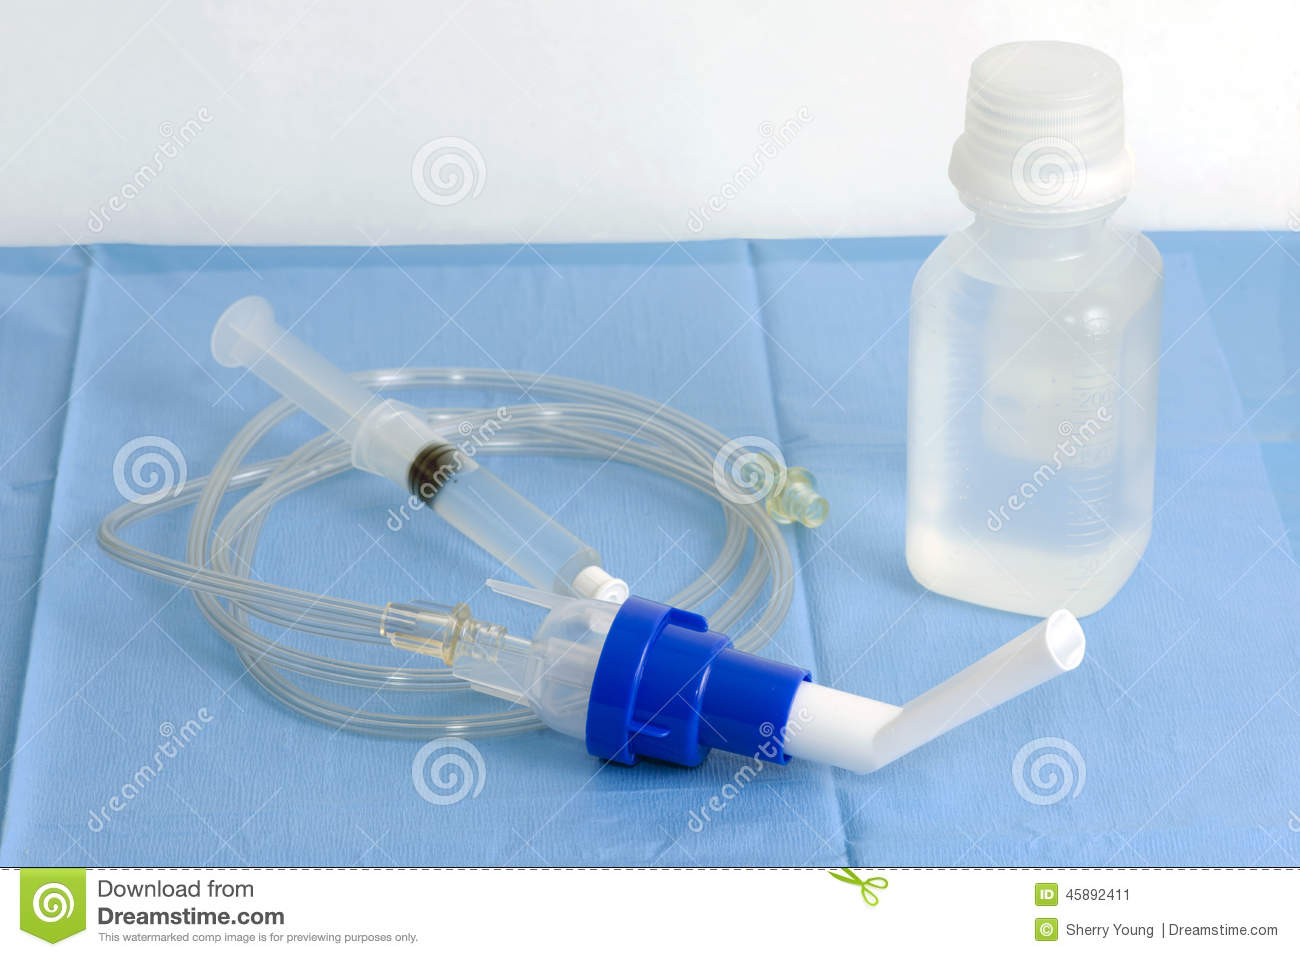 Inhalation Therapy Chamber And Sterile Saline On Blue Sterile Drape 